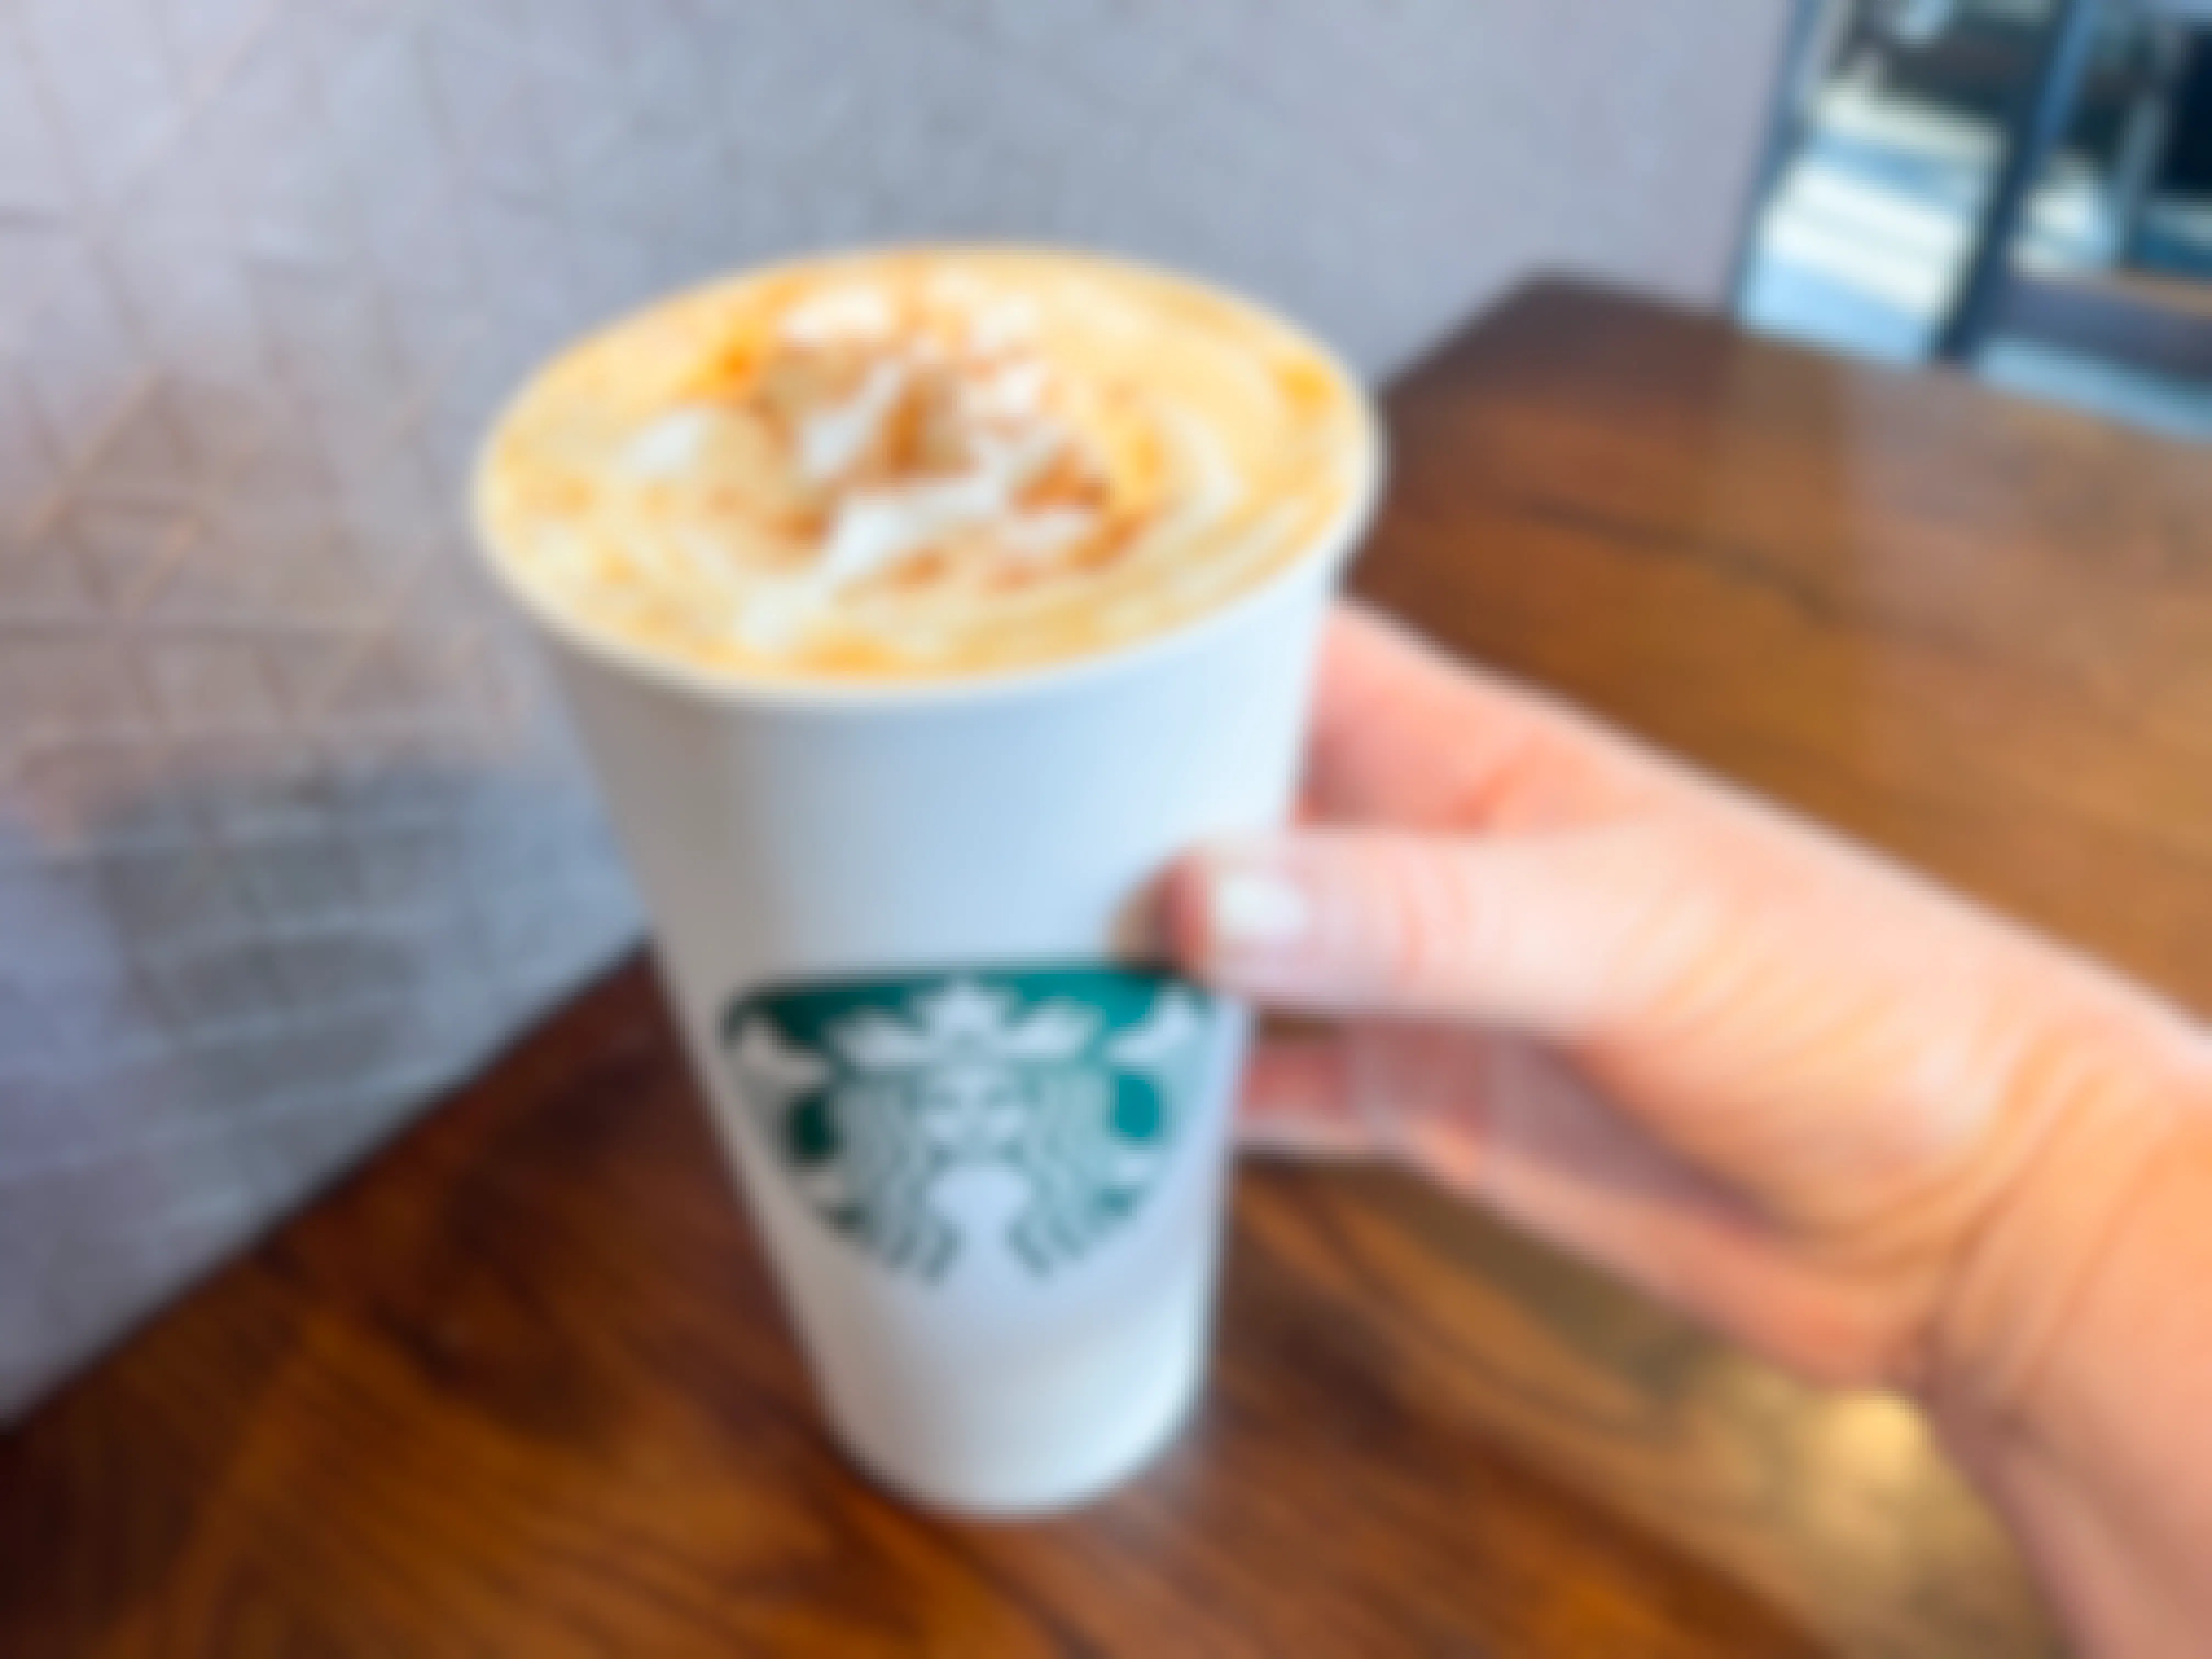 Hand holding A Spiced Latte in a Starbucks cup.